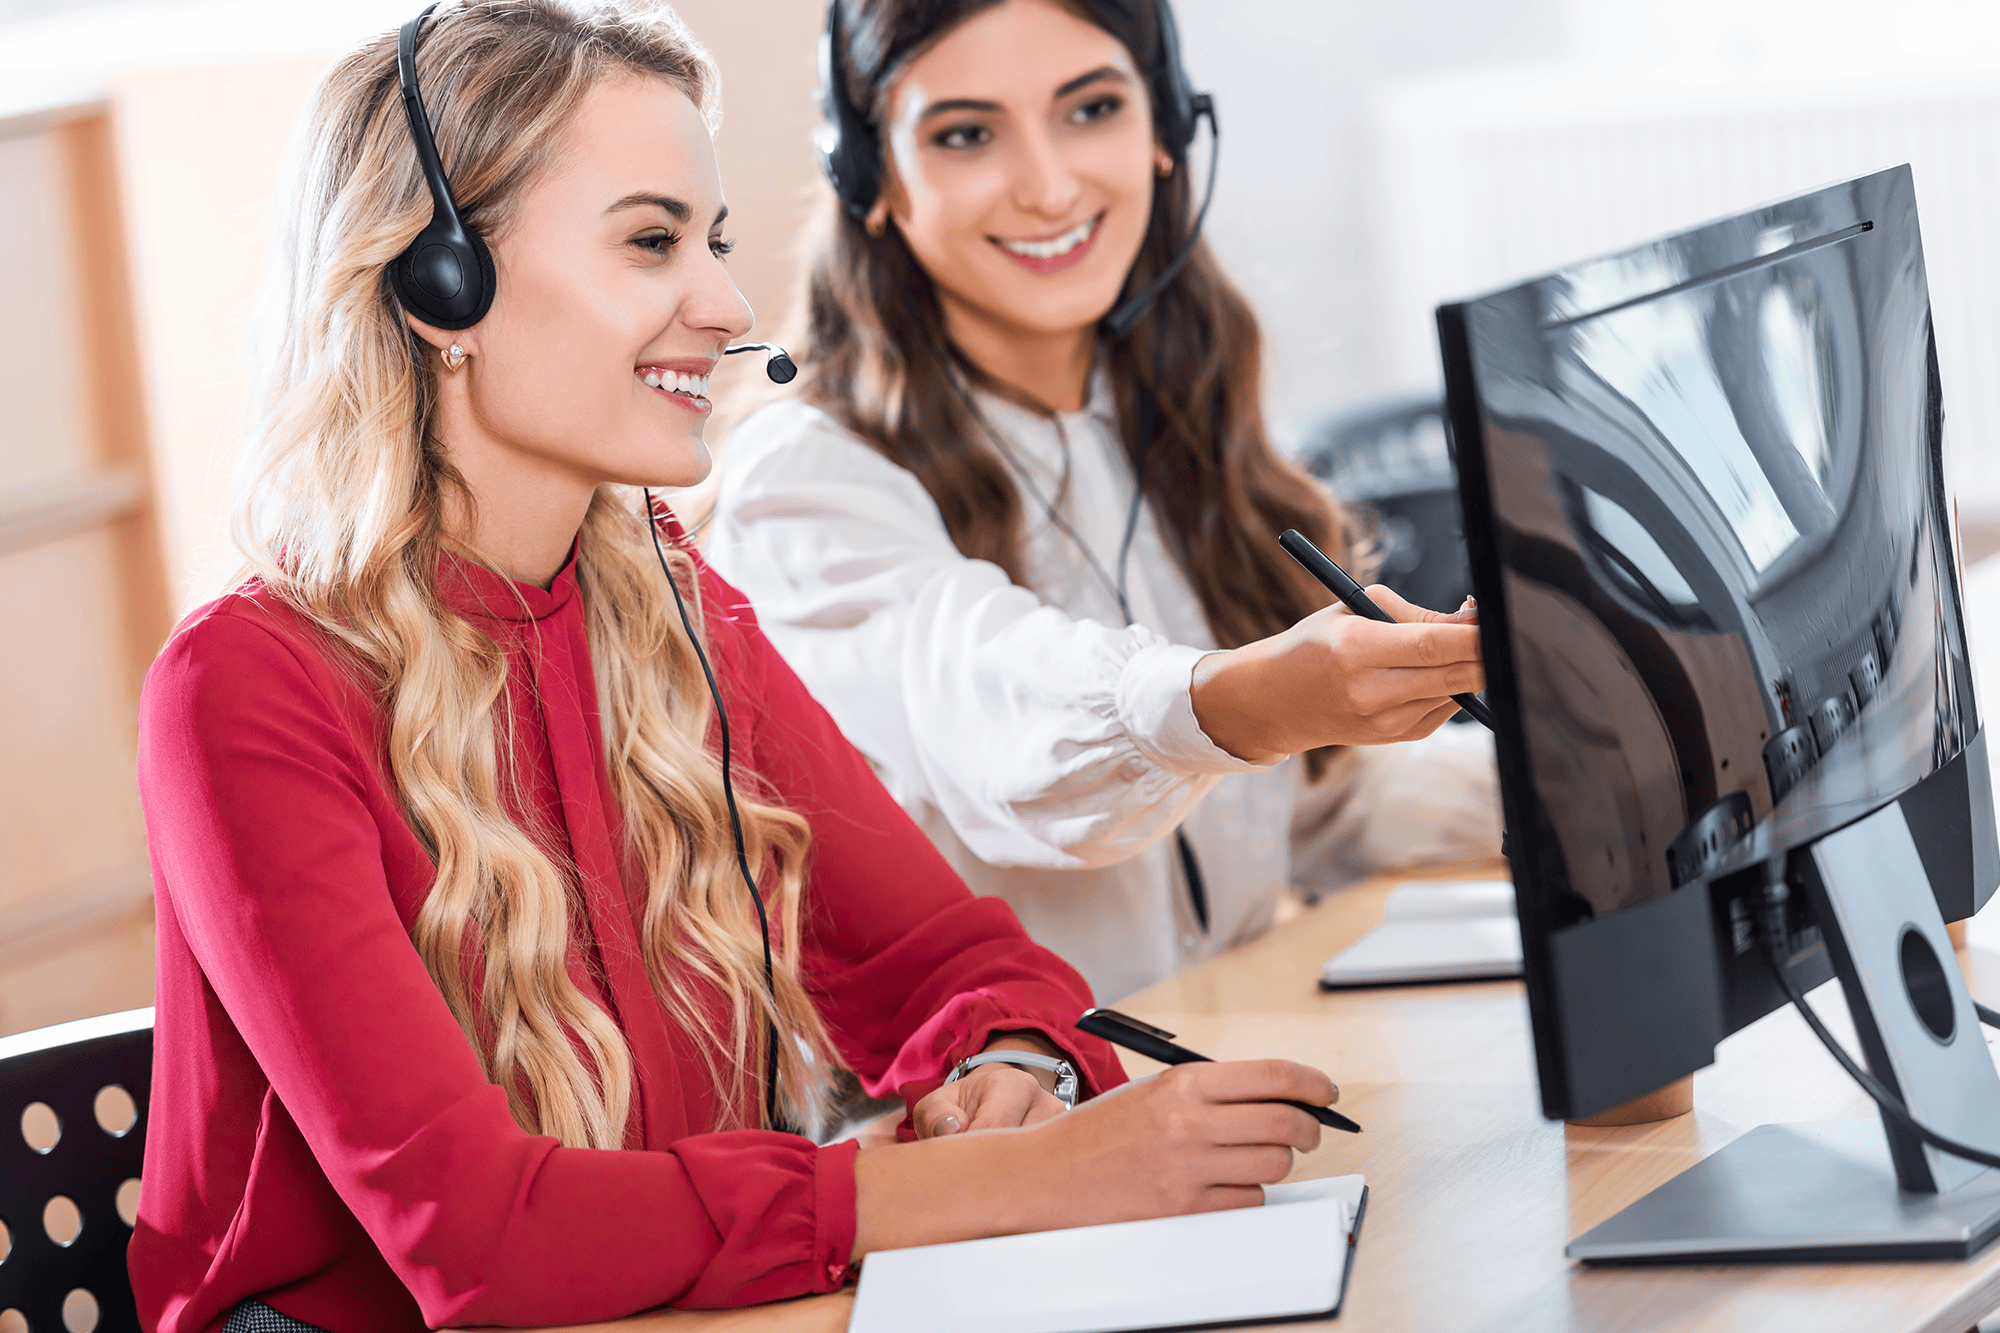 5 Top Customer Support Languages Every Company Needs